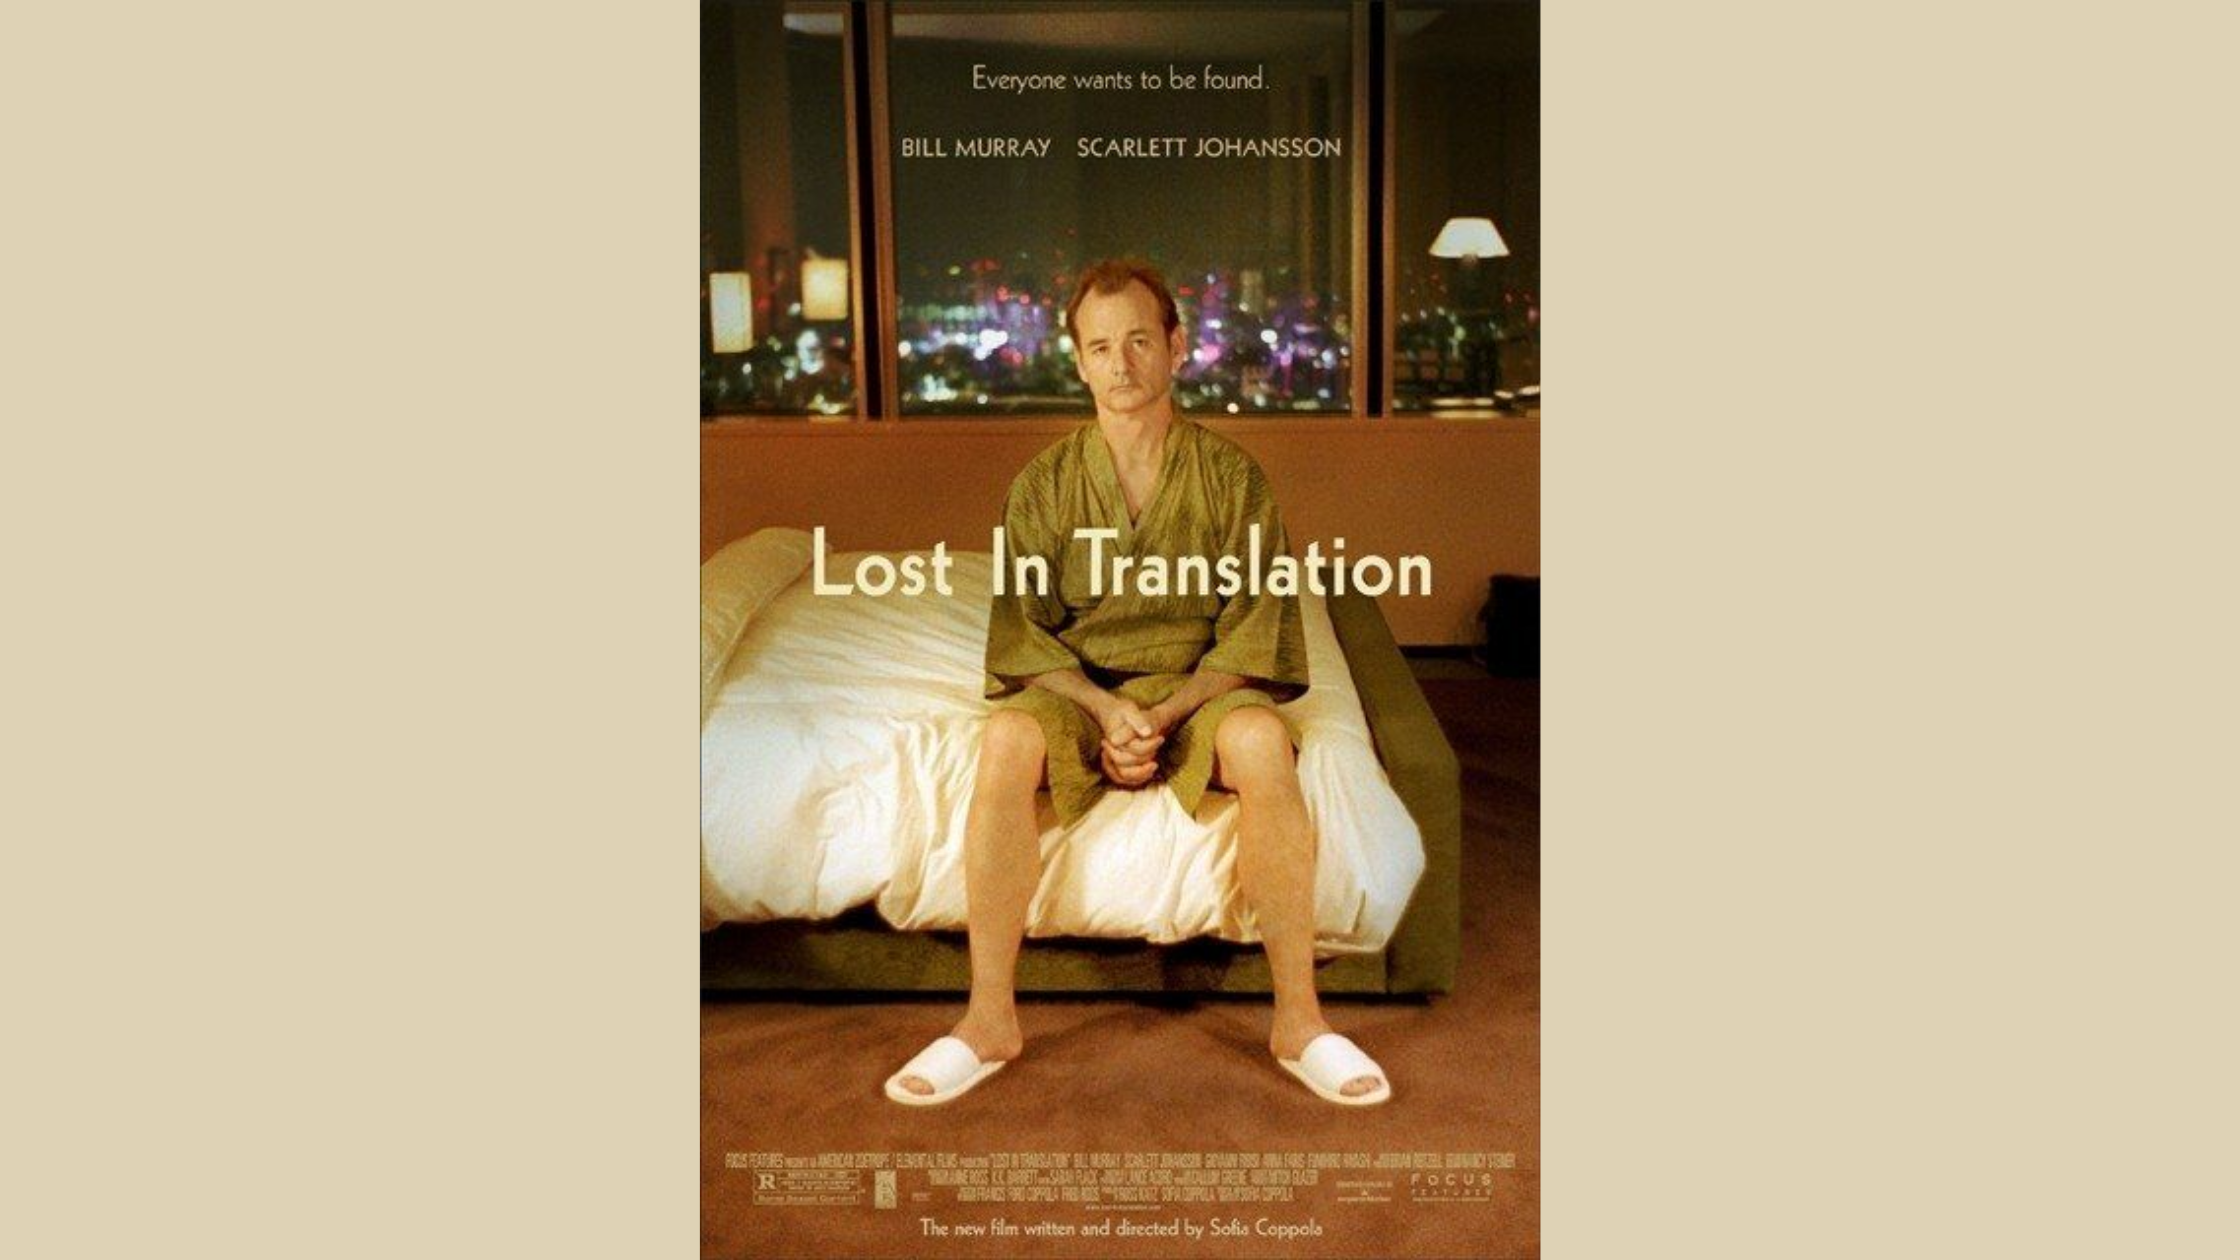 The egregious racism against Asians in 'Lost in Translation